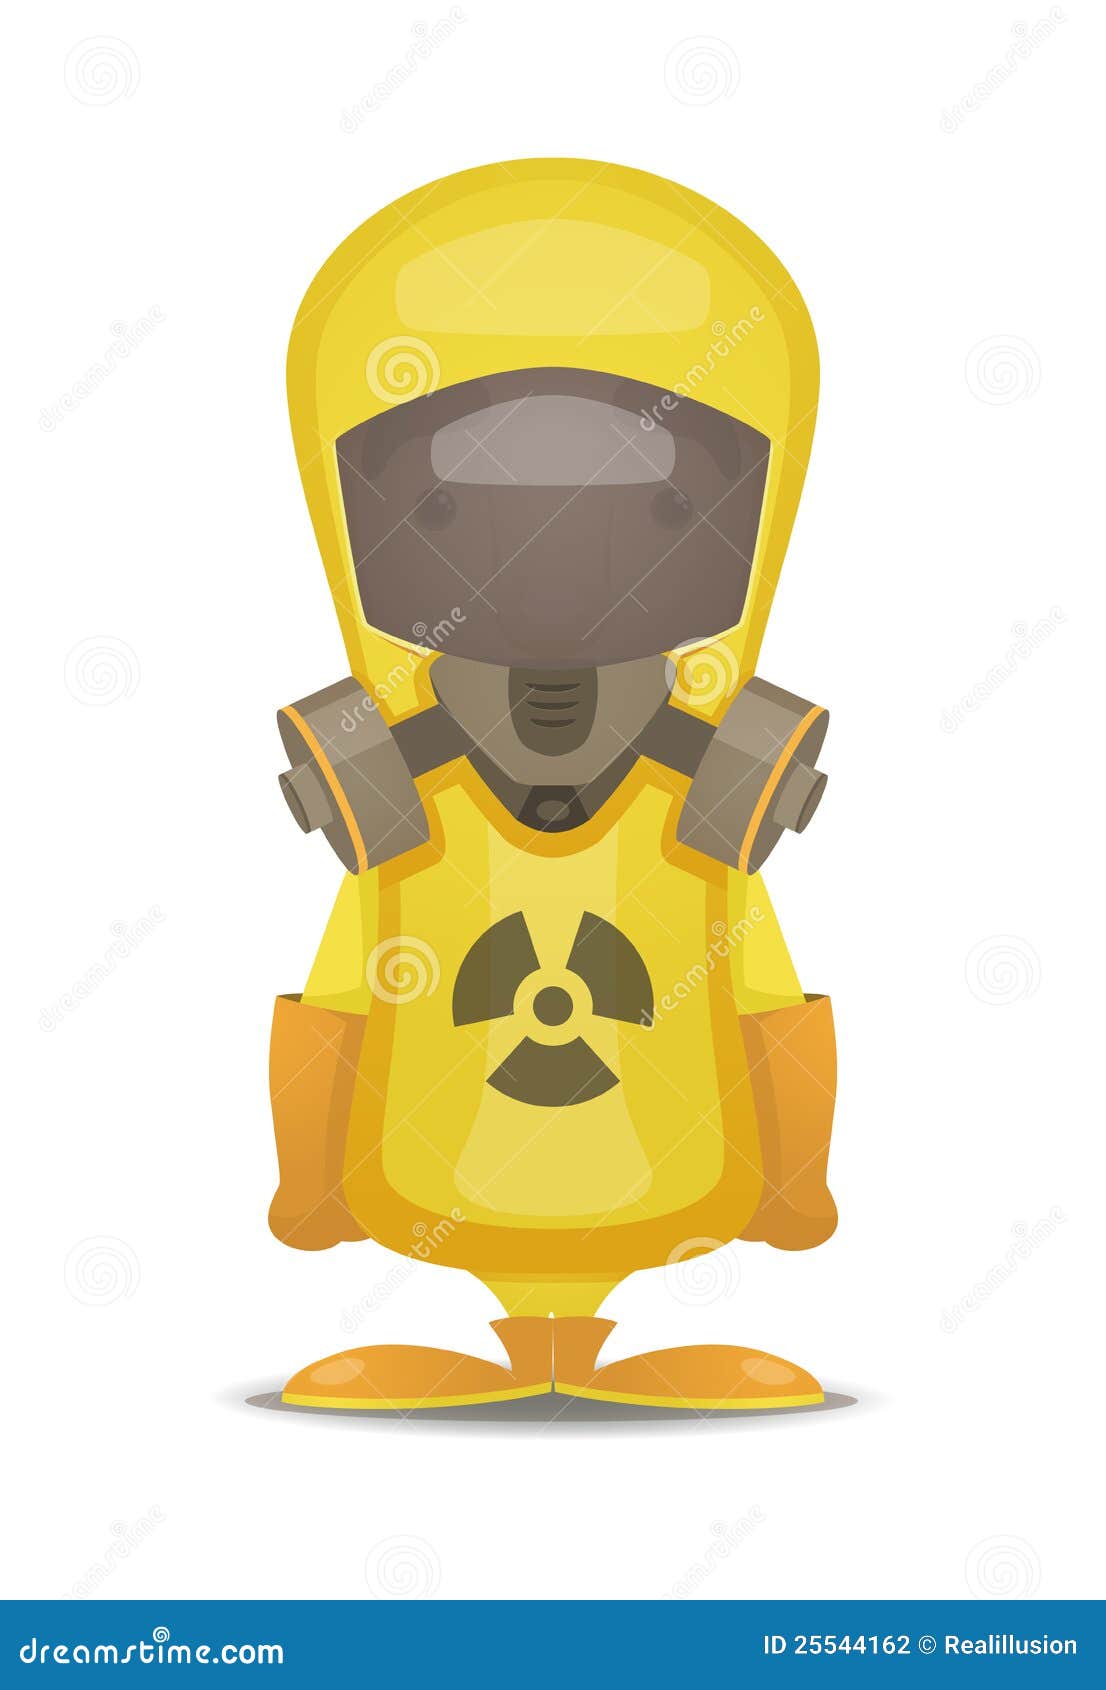 Radiation Protection Suit stock vector. Illustration of yellow - 25544162